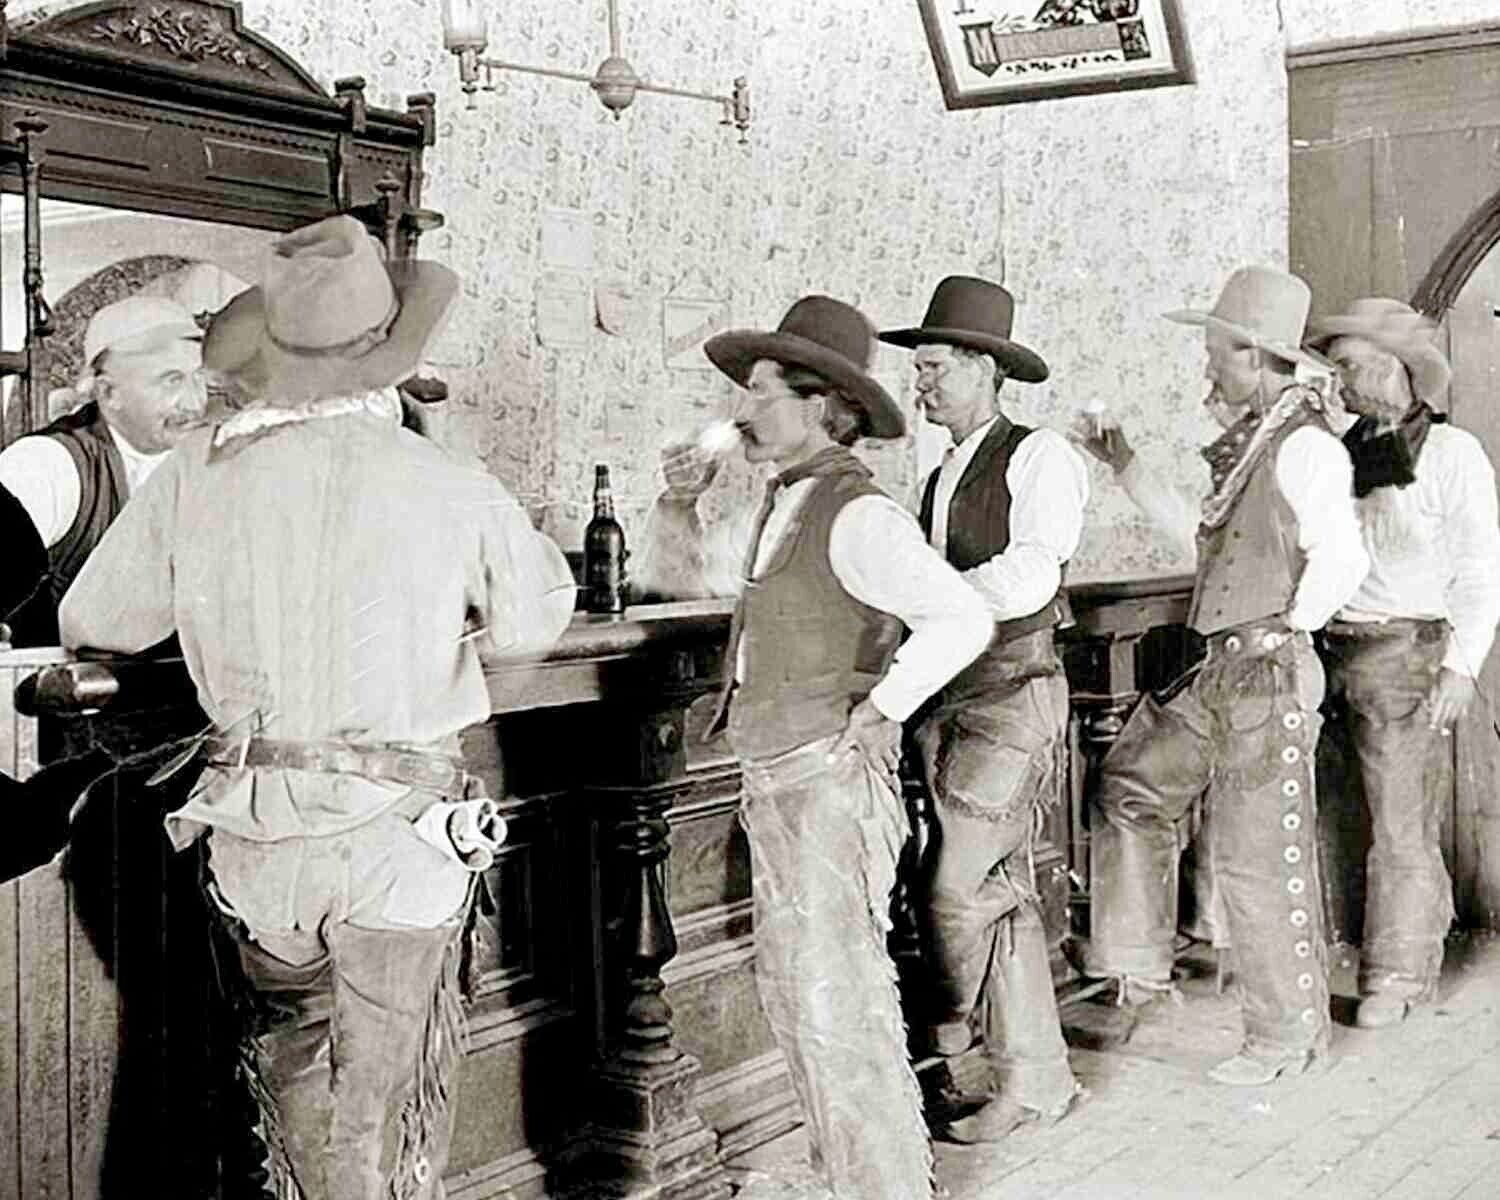 Old West Cowboy Saloon 1880s  Mousepad Computer Mouse Pad Accessory 7 x 9